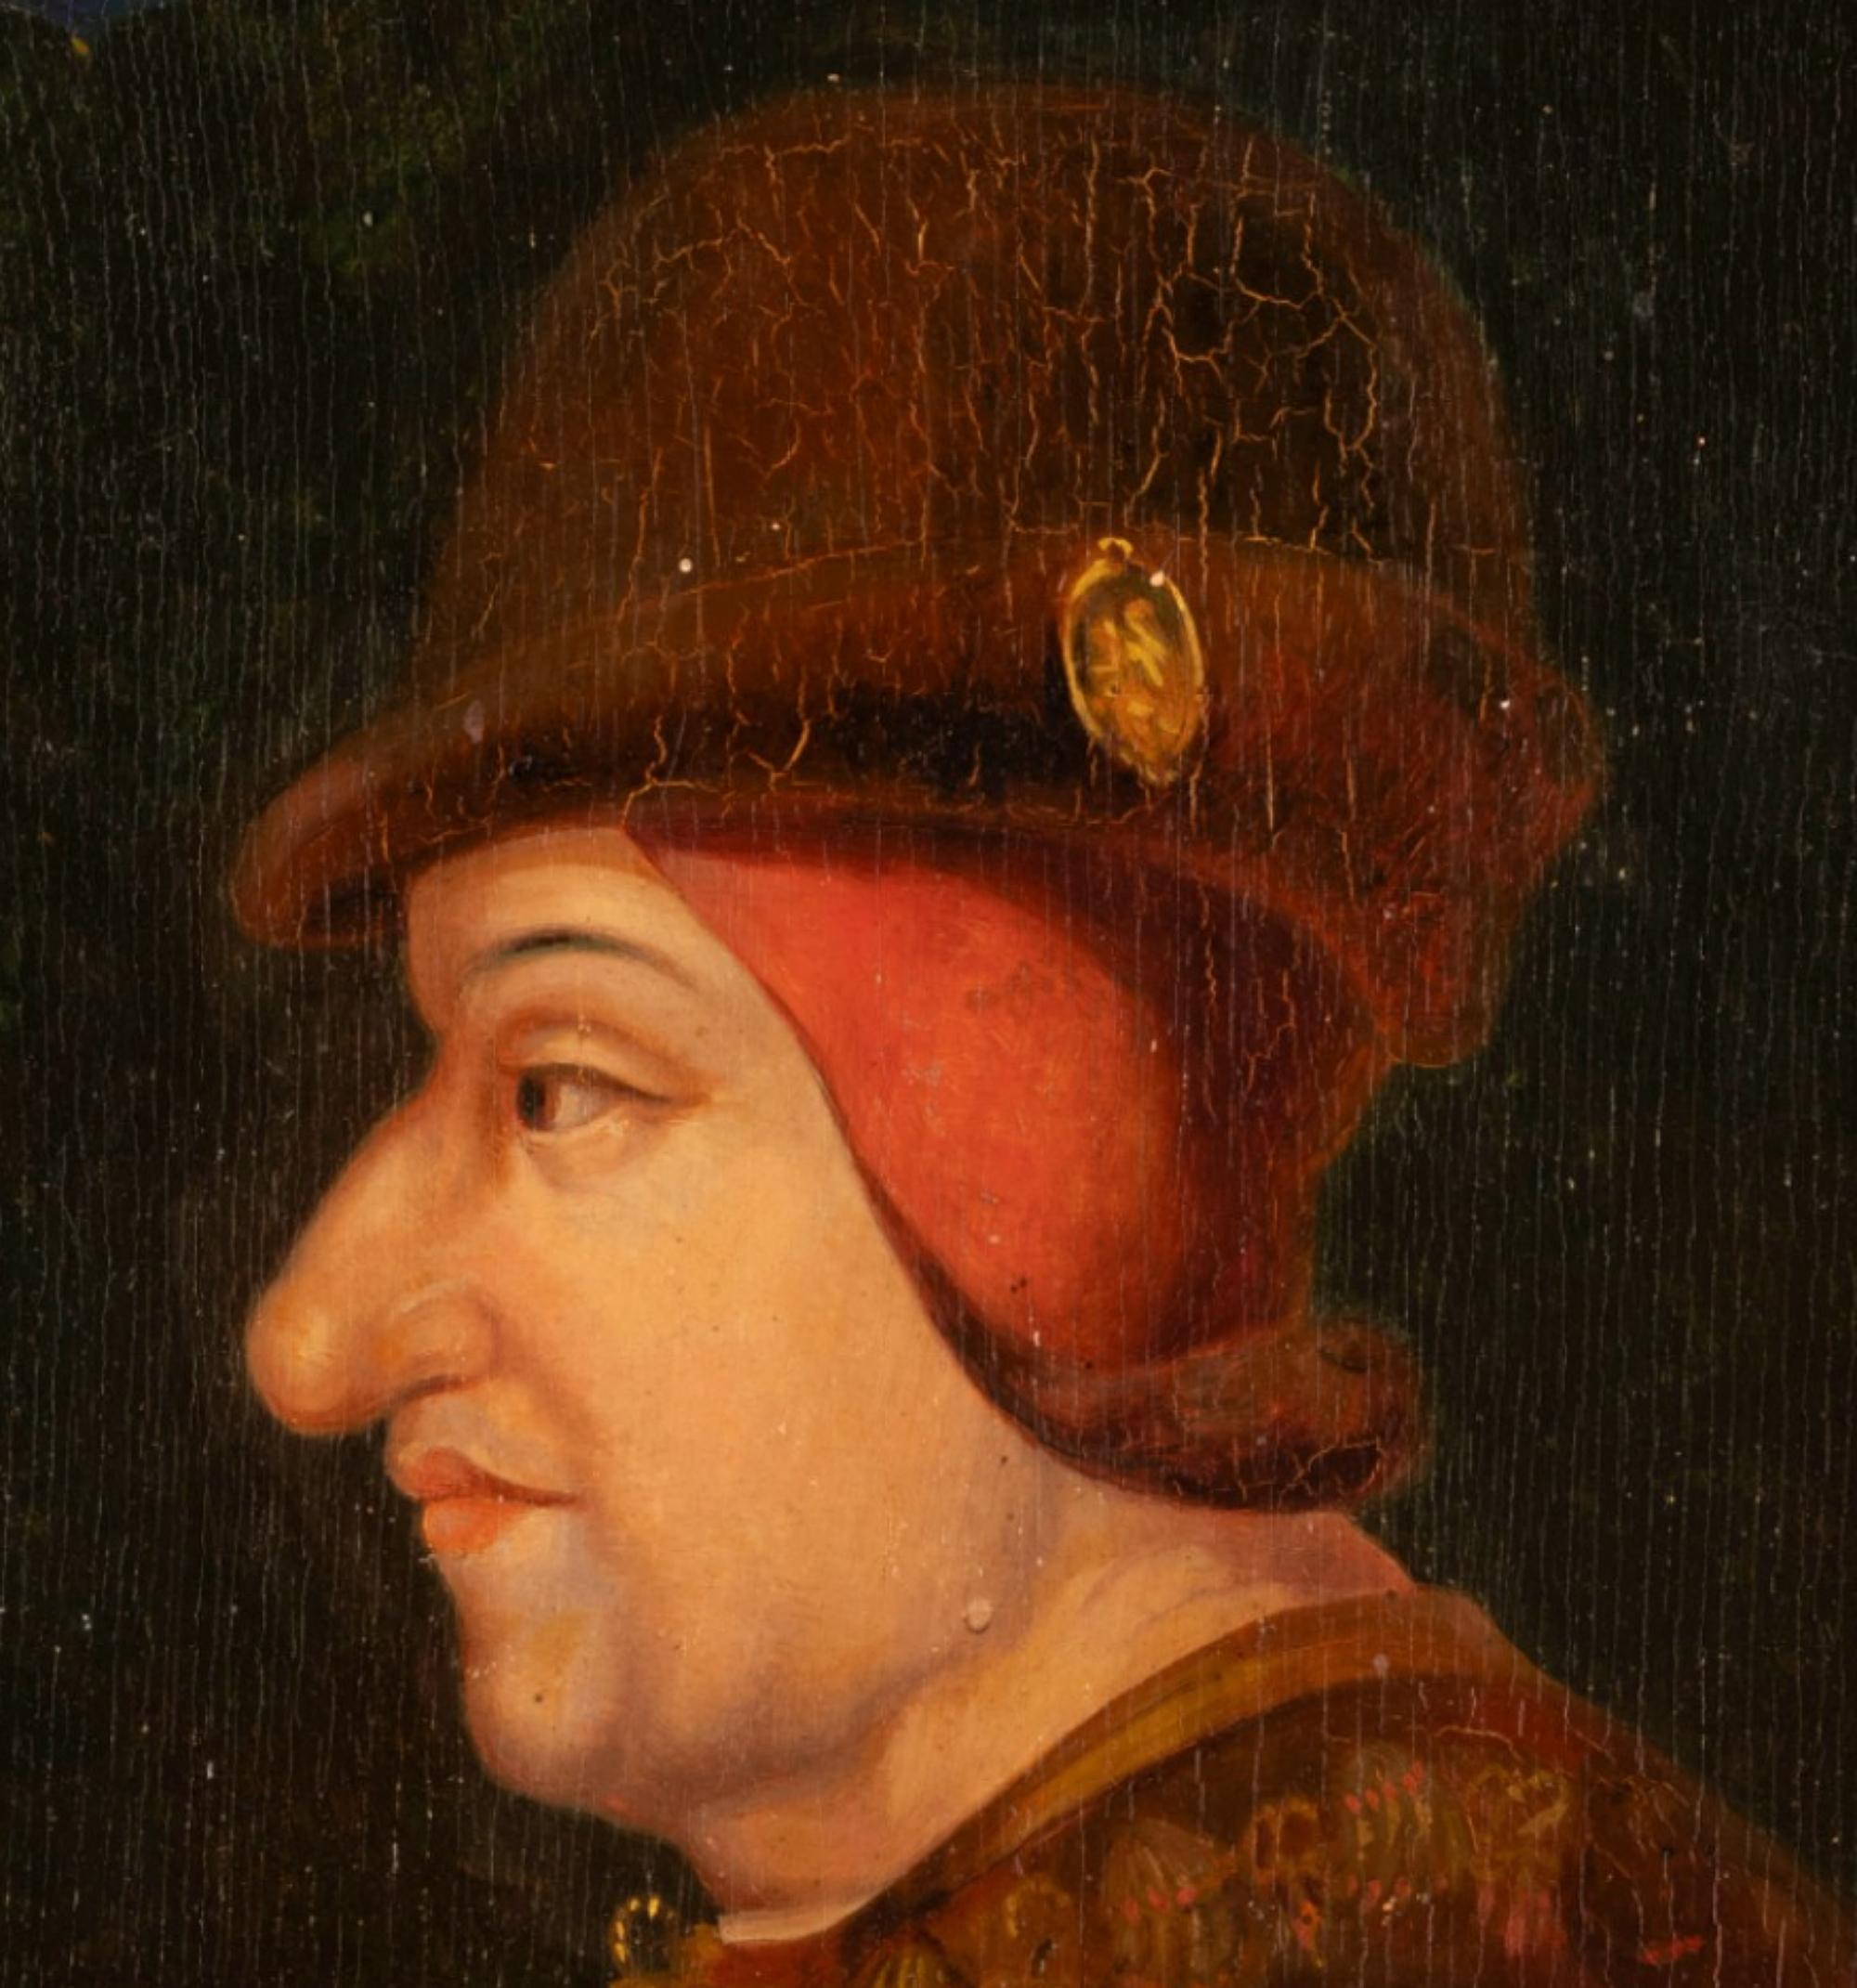 Portrait Louis XI of France end 17th century.

Oil on oak panel.
France
Measures: 43.5 x 29 cm (D. 50 x 35.5 cm).
With frame.
Origin: French private collection

On July 3, 1423, King Louis XI of France was born. On July 3, 1423 in Bourges,